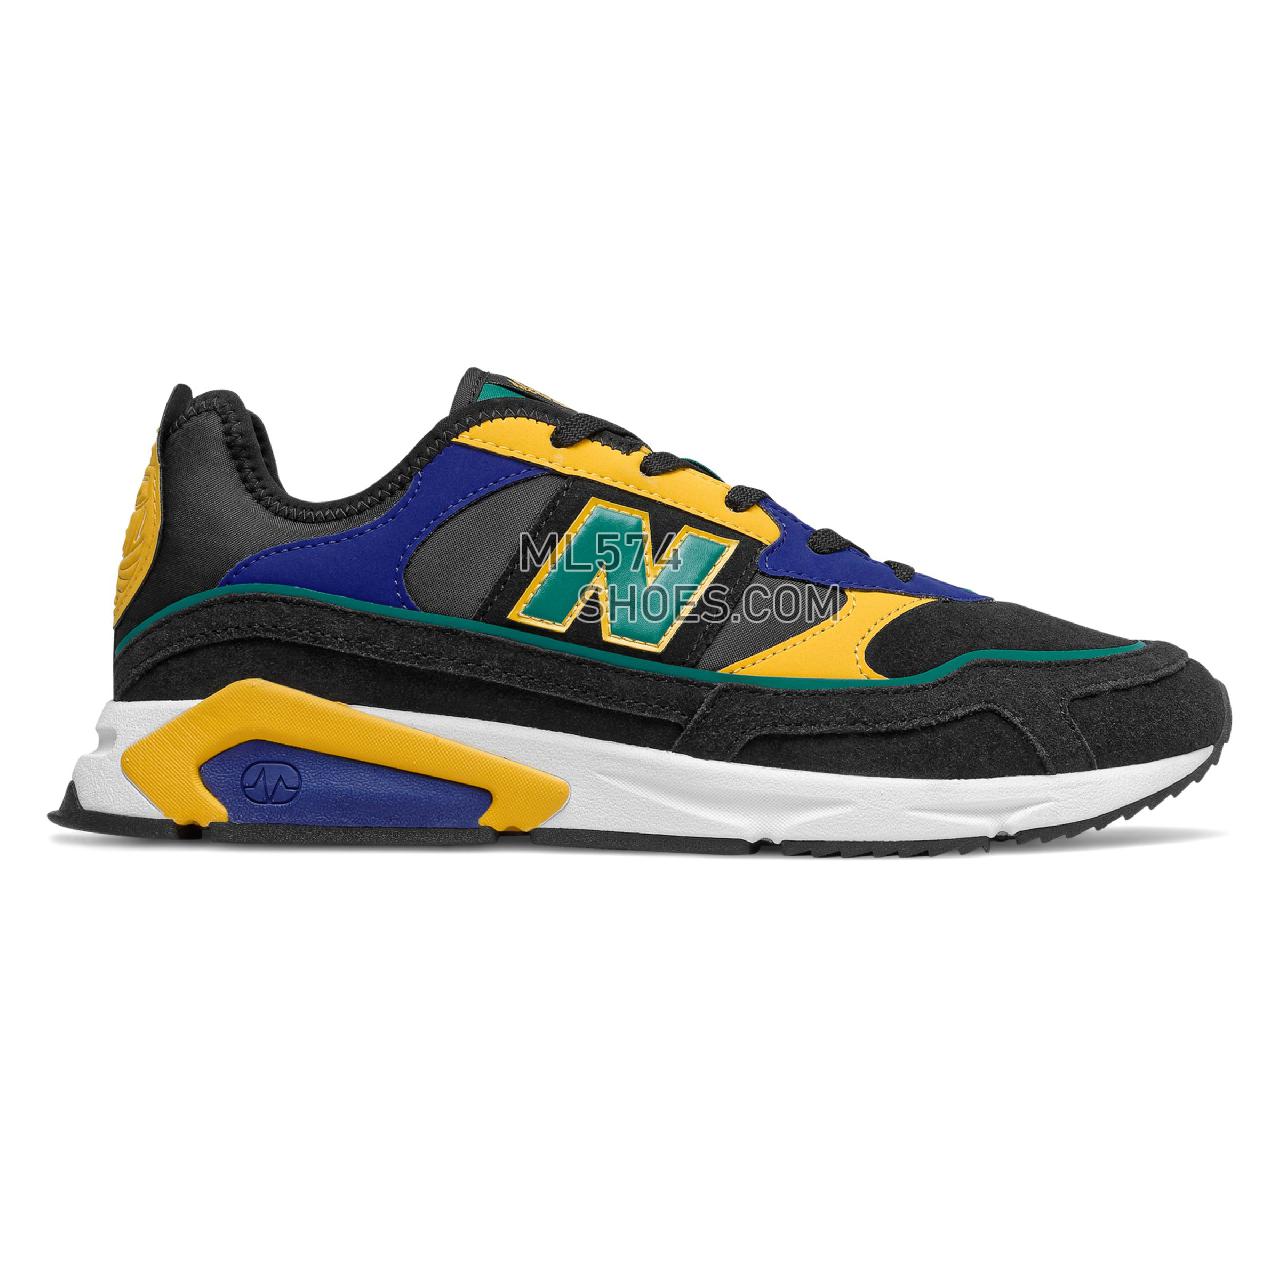 New Balance X-Racer - Men's Sport Style Sneakers - Black with Team Teal - MSXRCXZ